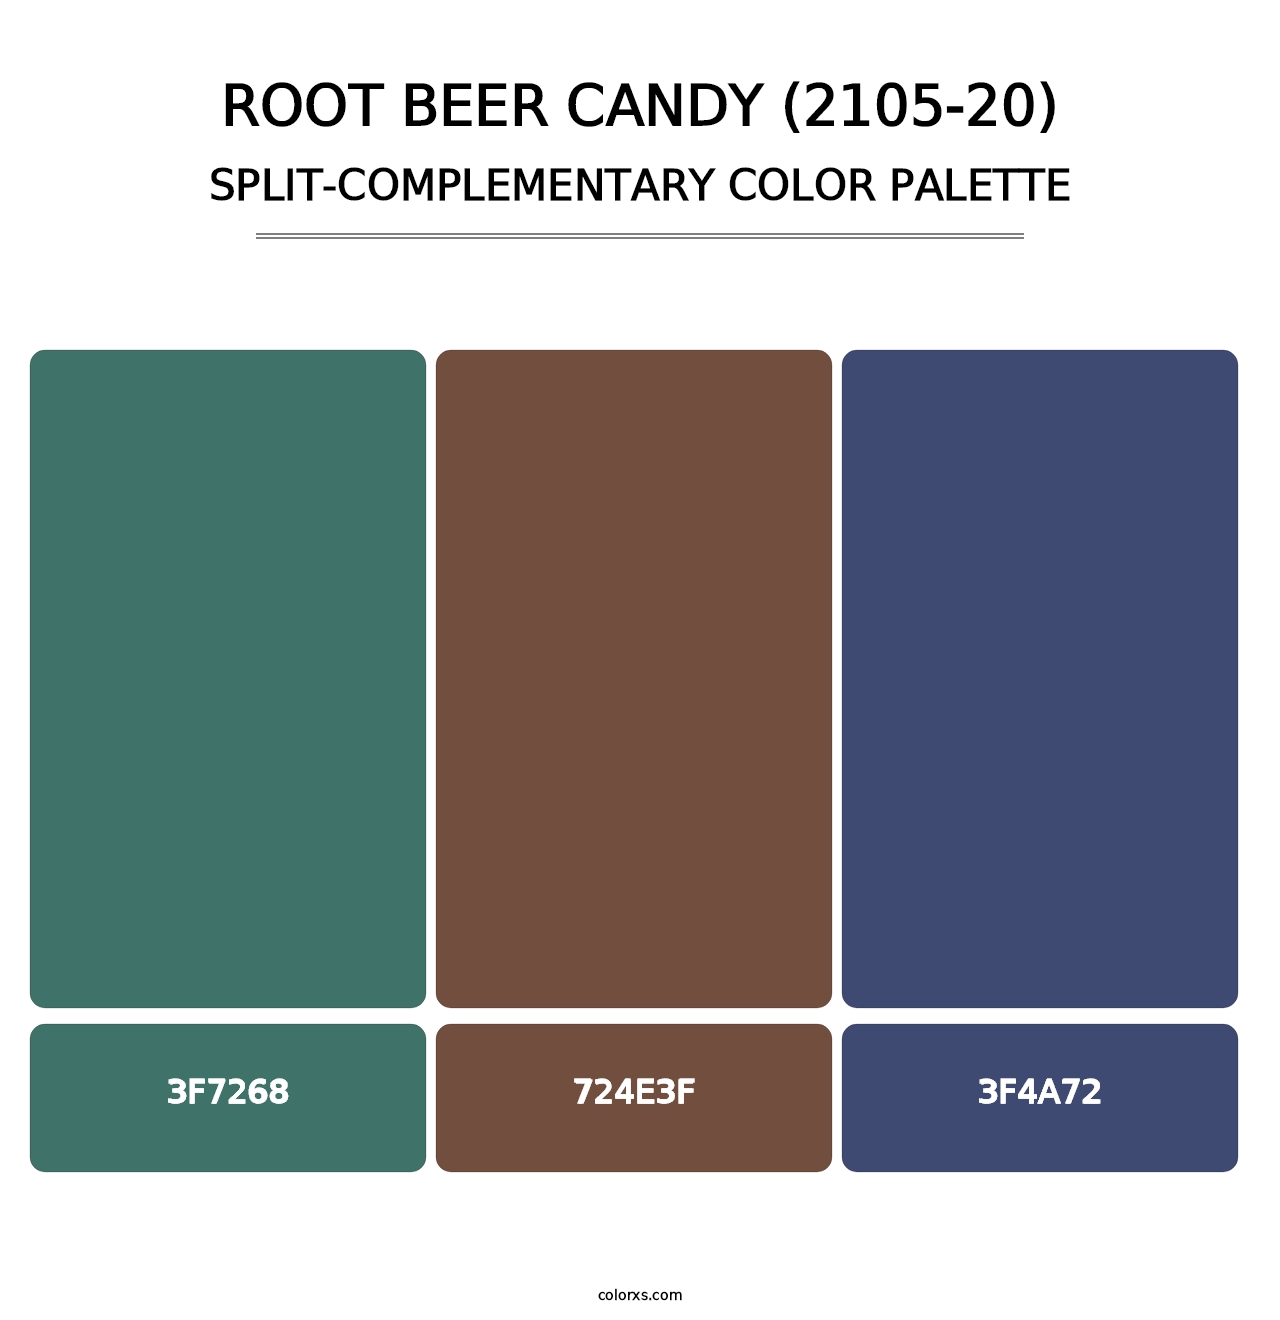 Root Beer Candy (2105-20) - Split-Complementary Color Palette